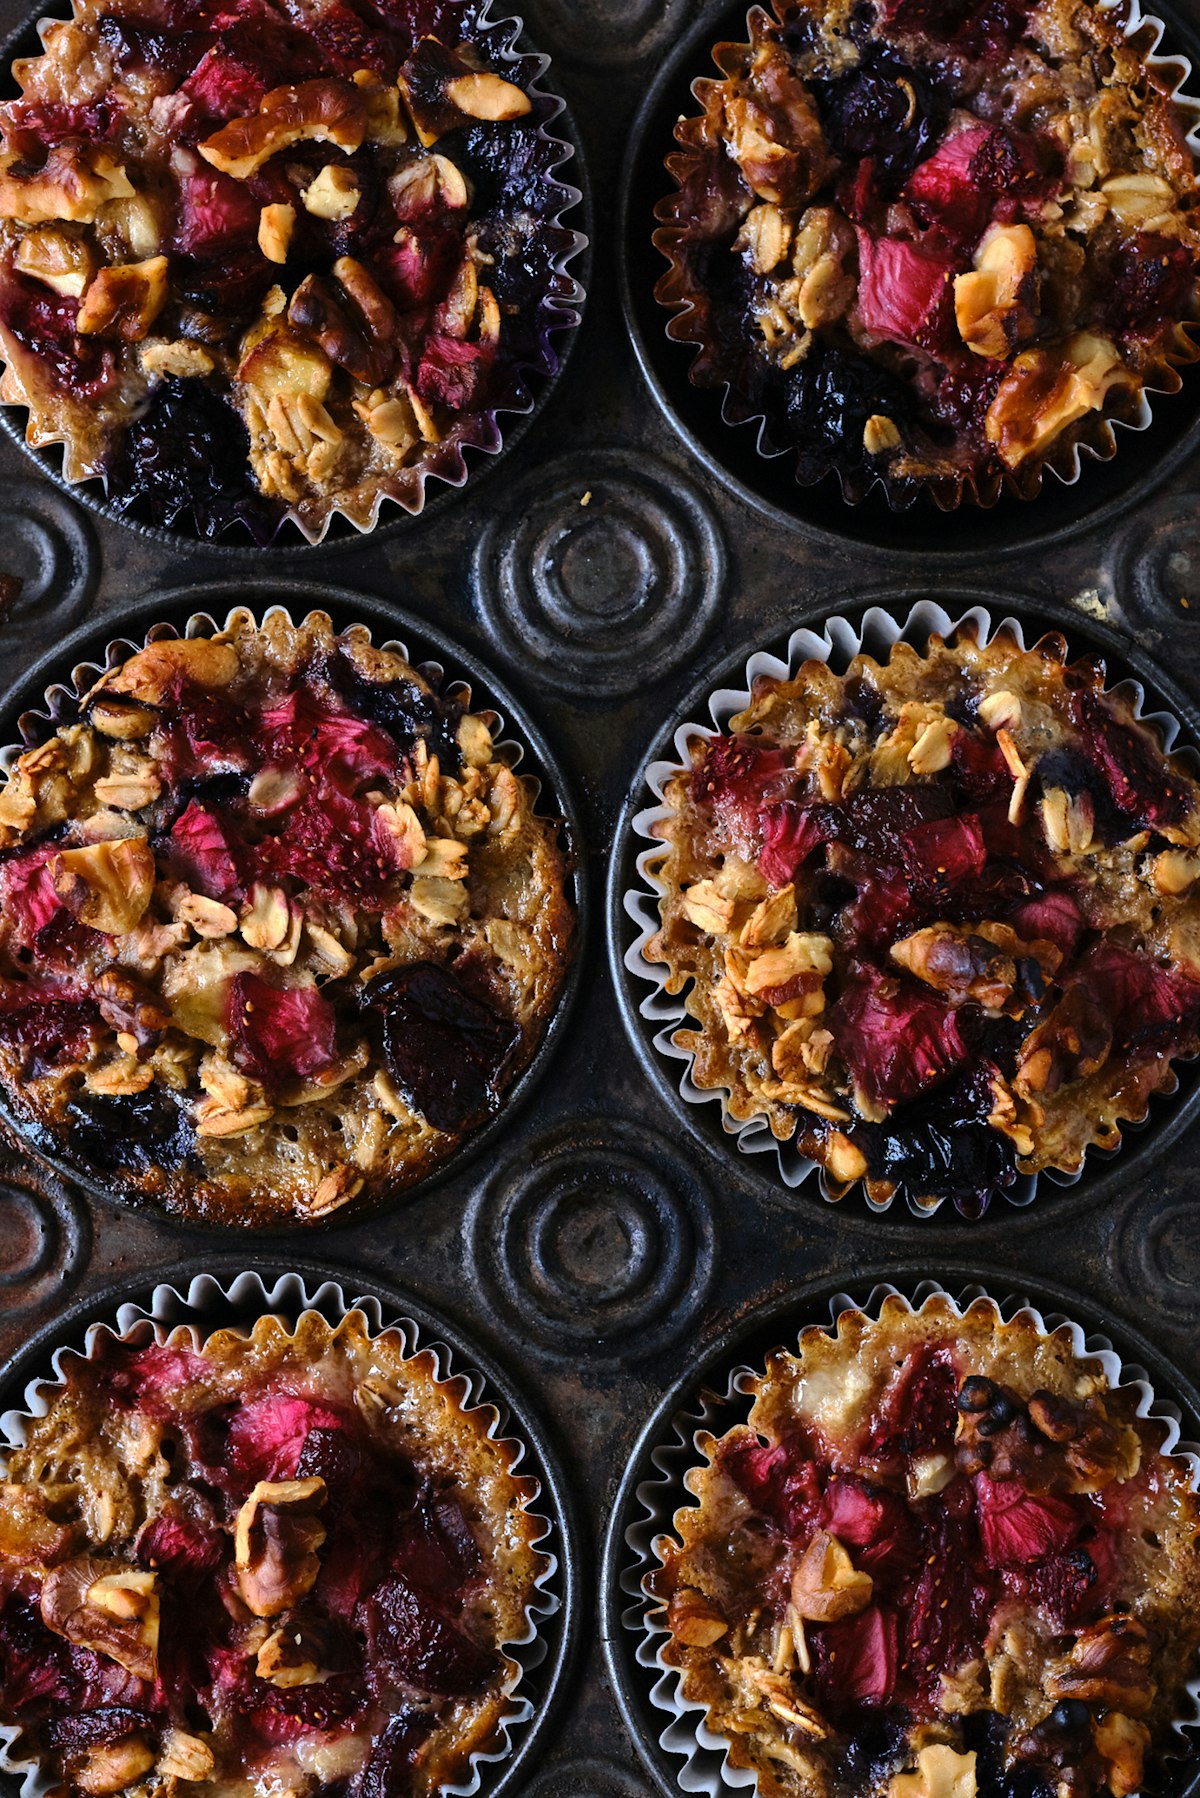 https://images.101cookbooks.com/baked-oatmeal-cups-v.jpg?w=1200&auto=format